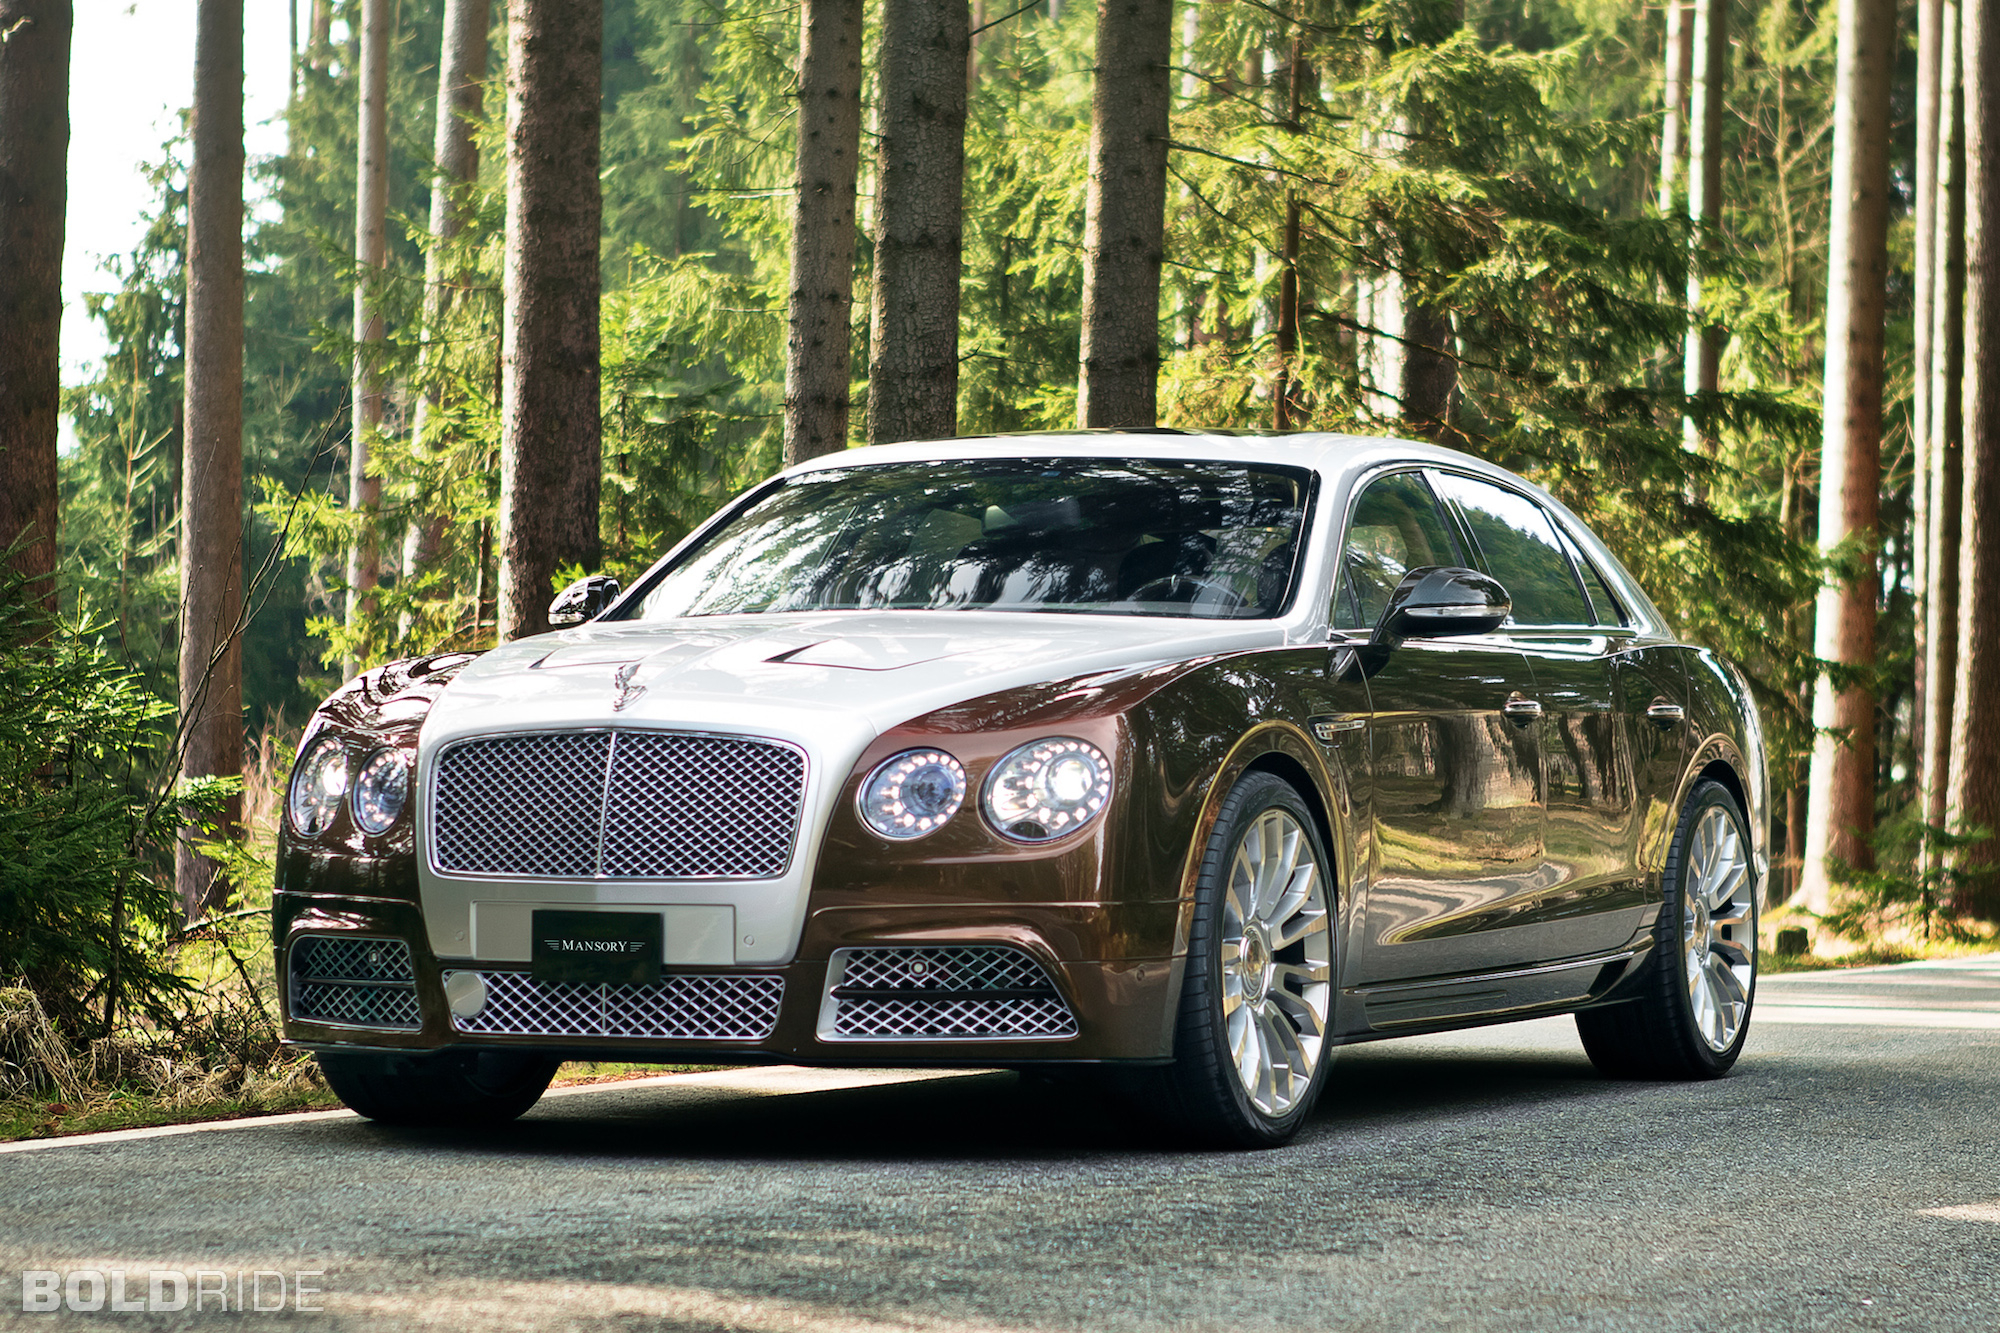 Bentley Continental Flying Spur Backgrounds, Compatible - PC, Mobile, Gadgets| 2000x1333 px